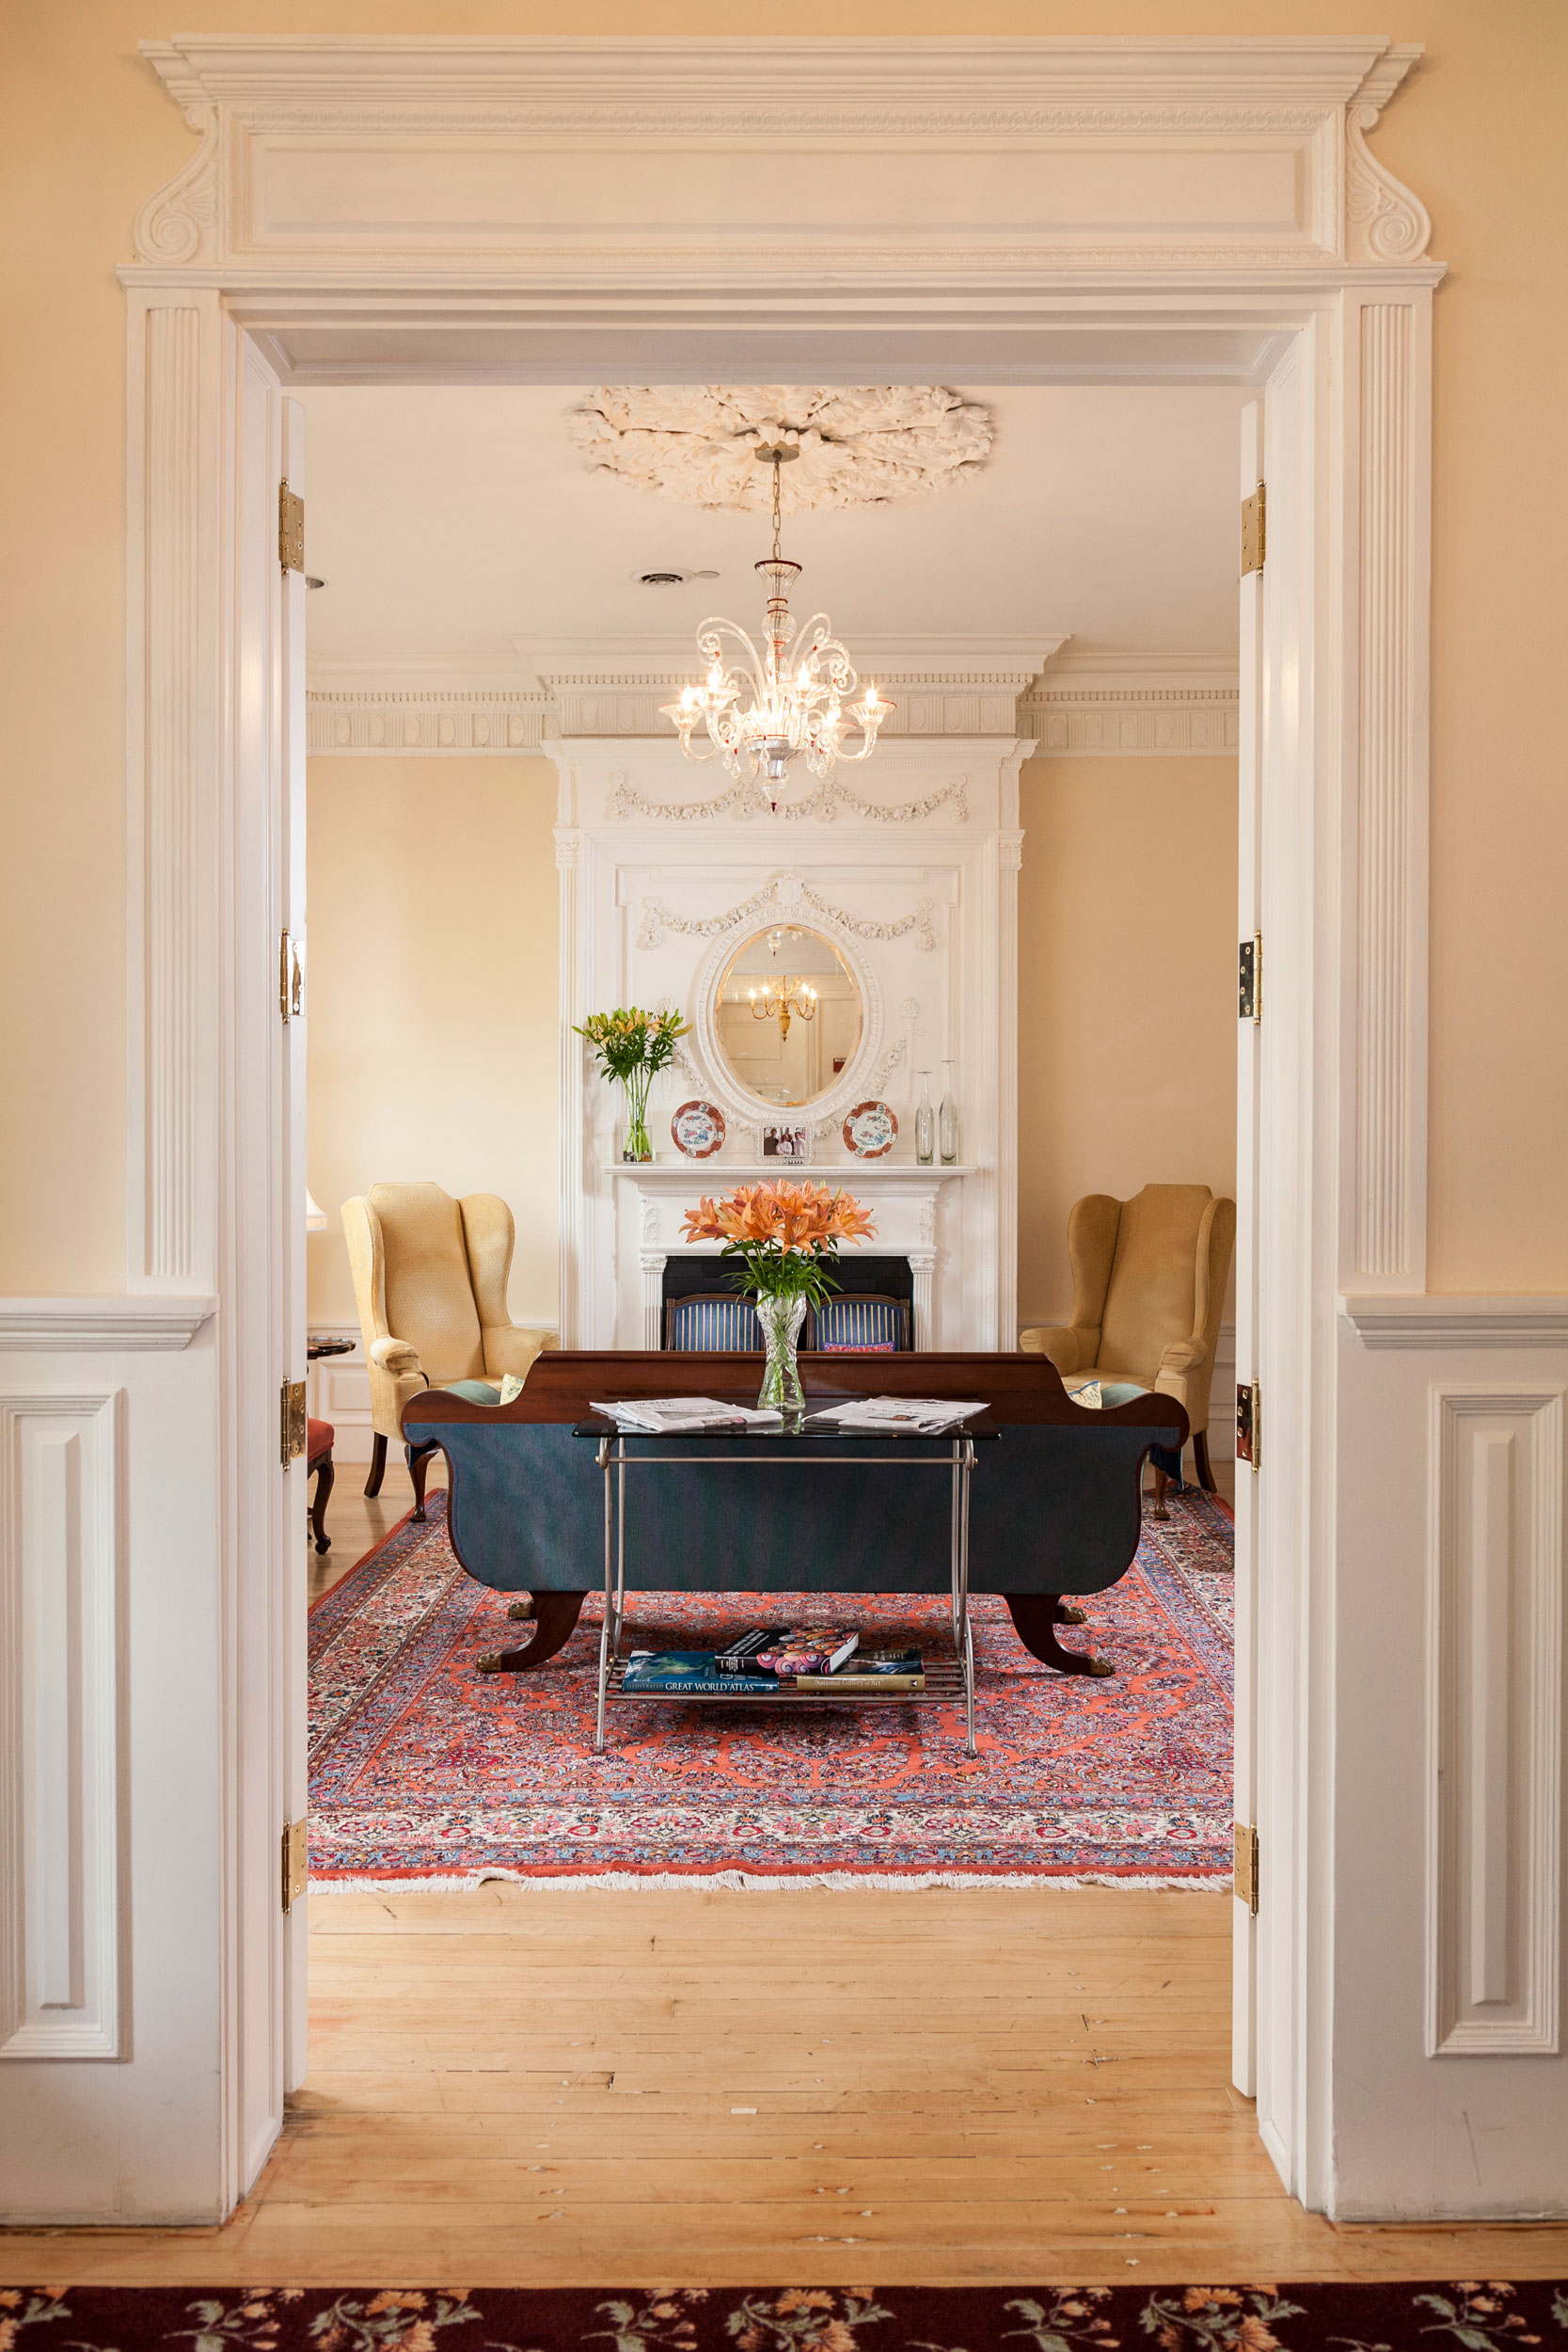  Former Embassies converted into Living Spaces in Washington DC. Photographed for The Washington Post Magazine. 